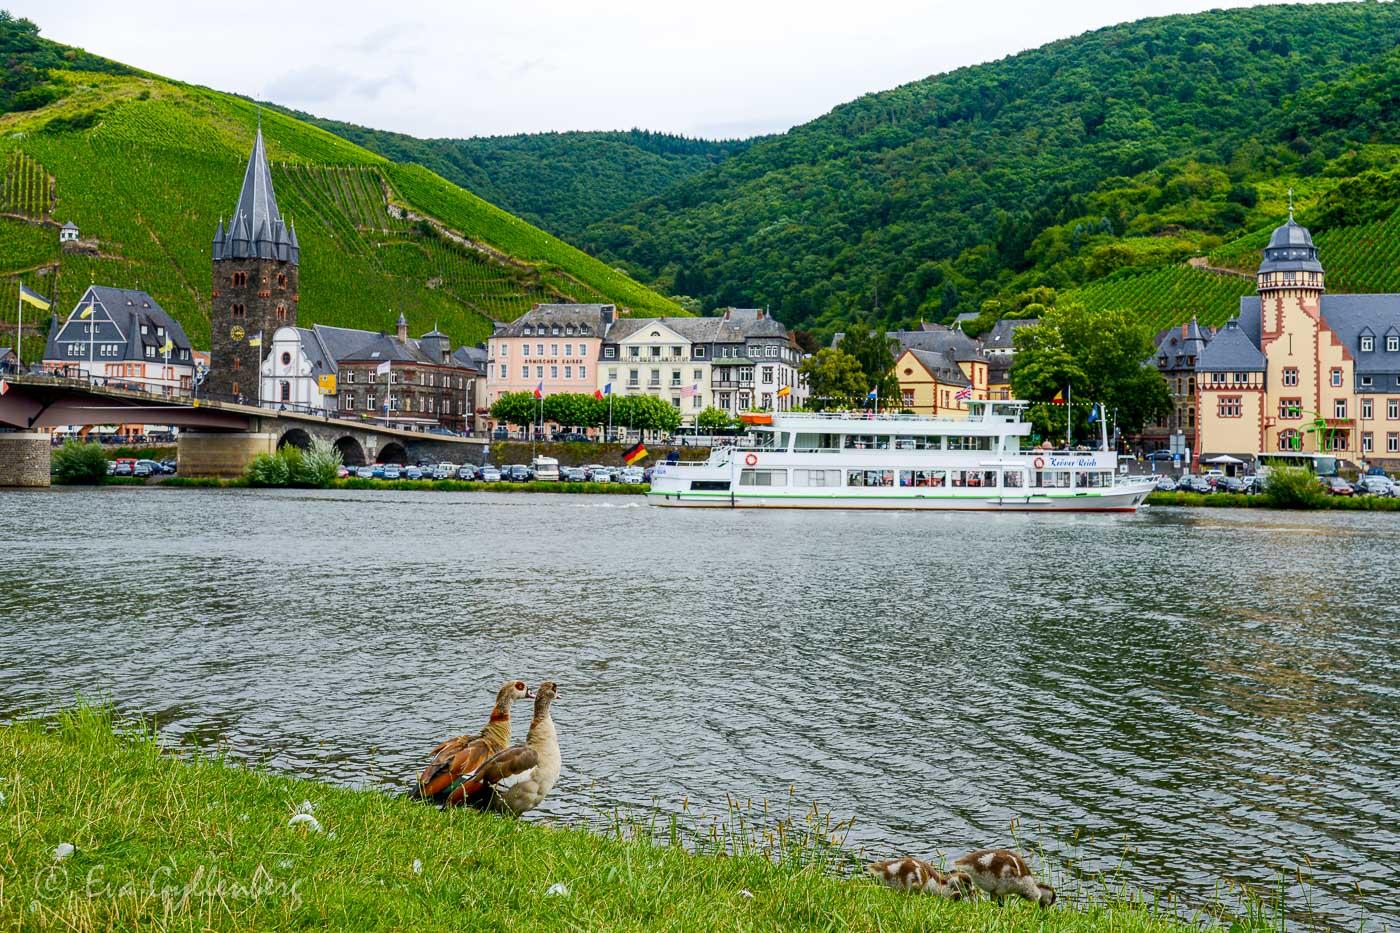 Bernkastel-Kues from one side of the Mosel, with two ducks